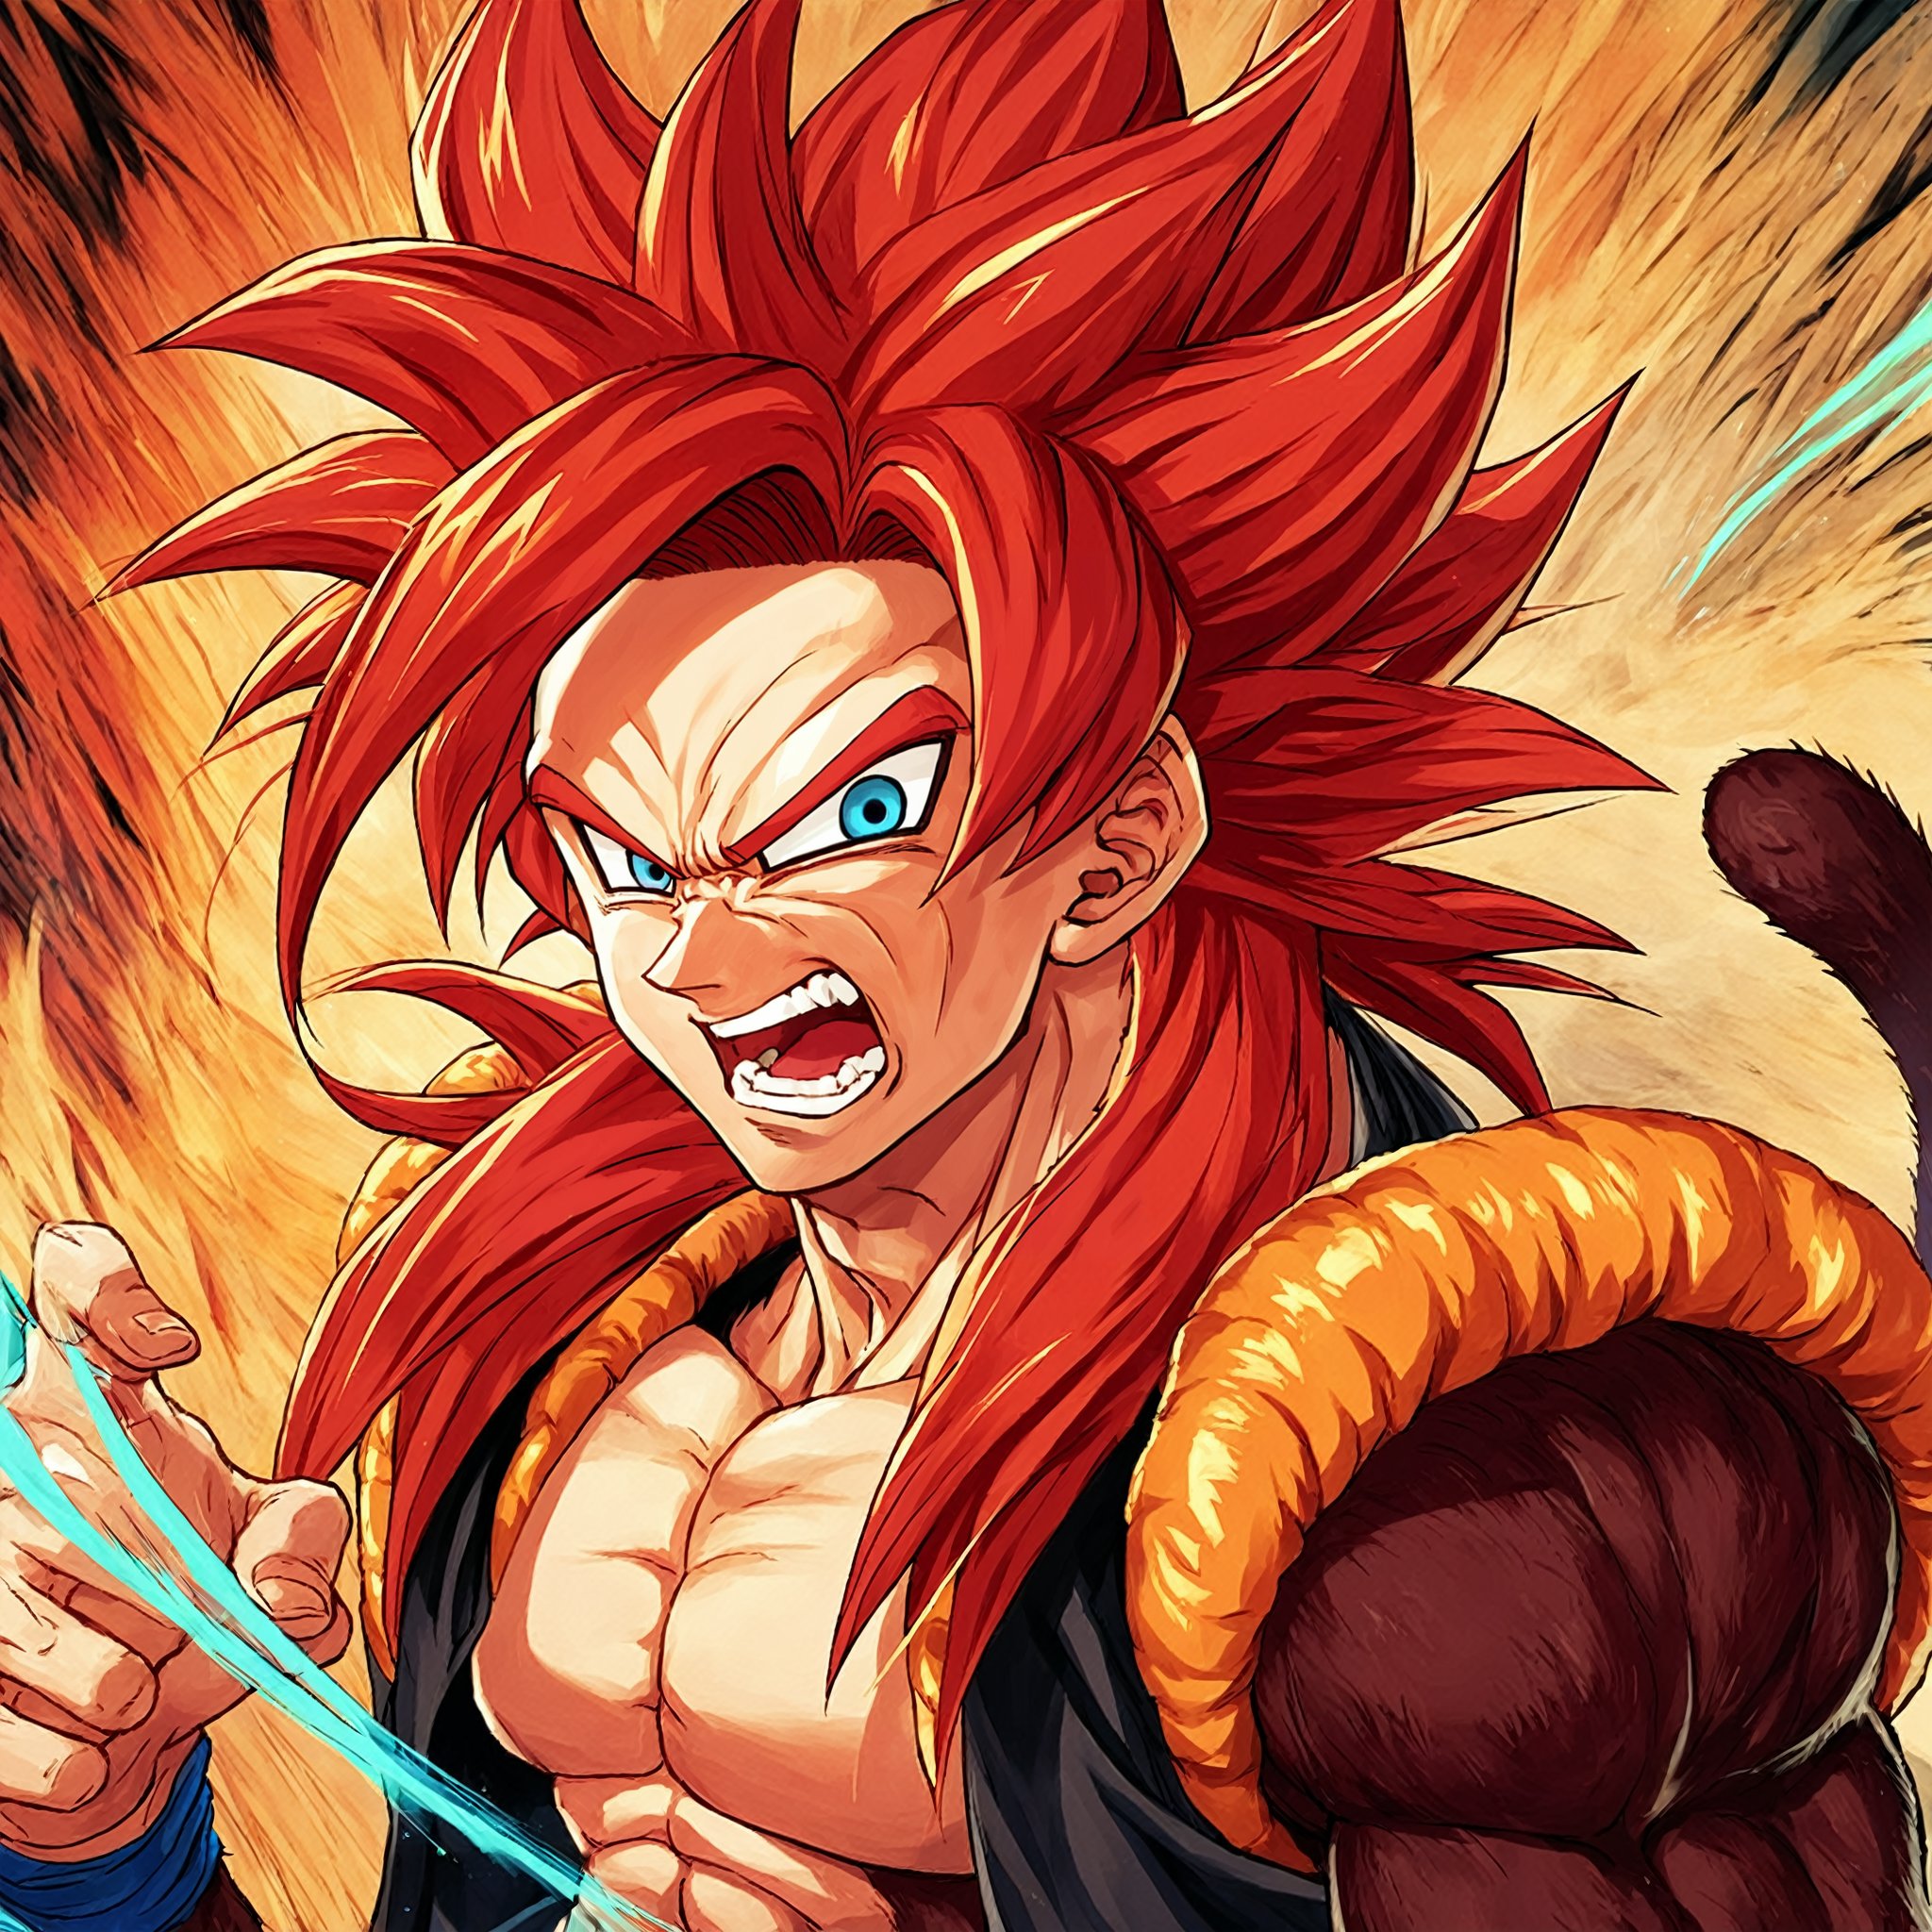 score_9, score_8_up, score_7_up, score_6_up, score_5_up, score_4_up, gogeta_ssj4, super saiyan, red hair, blue eyes, body fur, spiked hair, monkey tail, solo, muscular male, aura, ki, abstract art, portrait, scream, open mouth, teeth, angry,   source_anime,  rating_questionable, 


